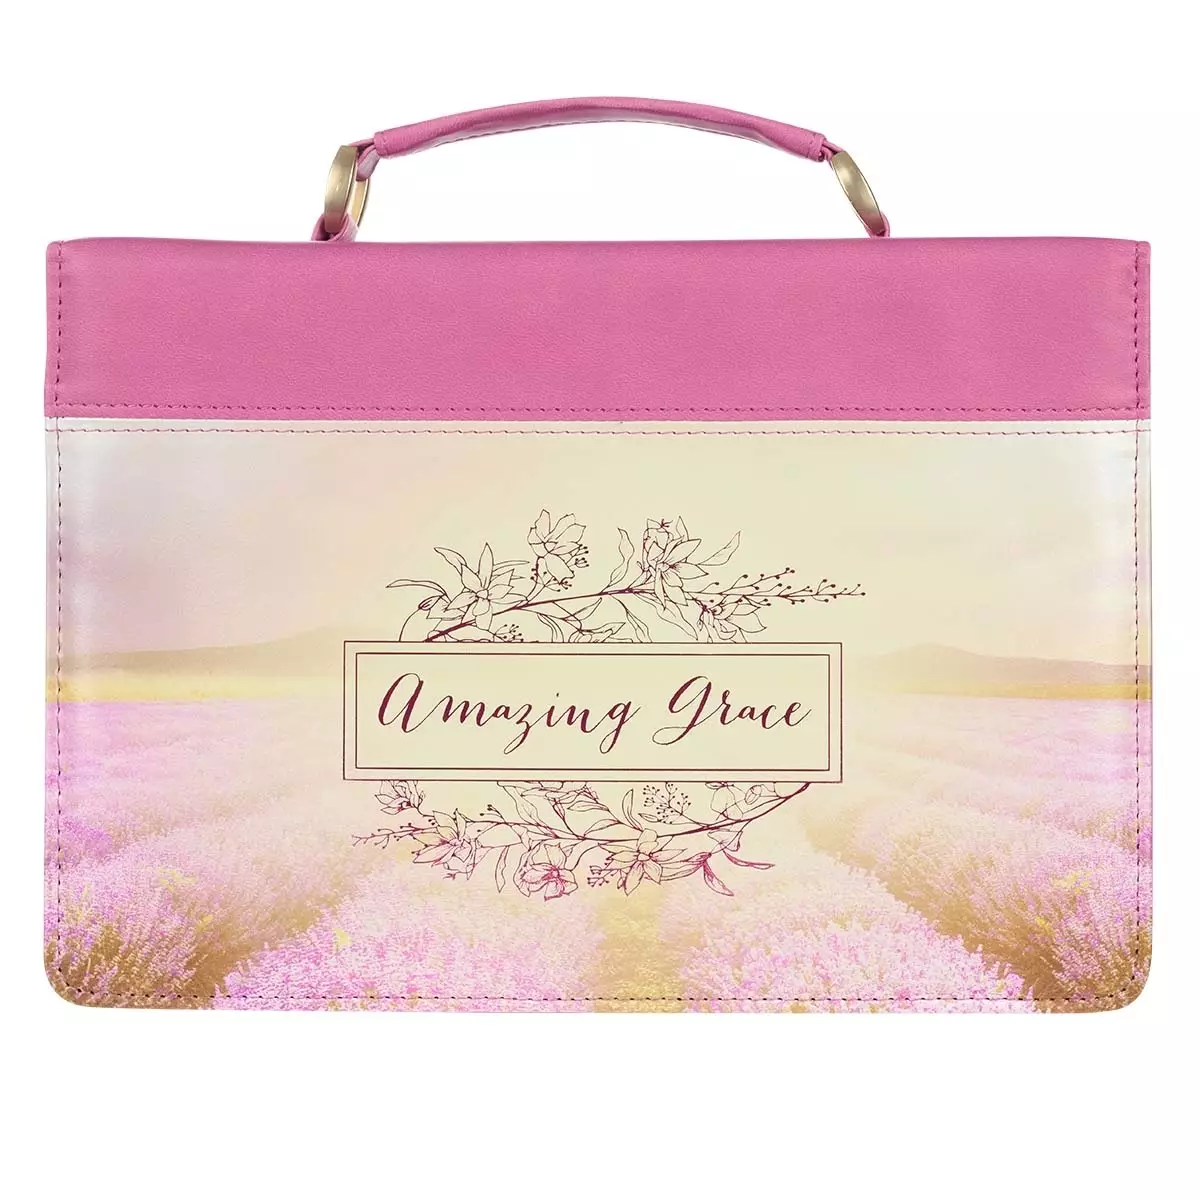 Medium Amazing Grace Scenic Pink Faux Leather Fashion Bible Cover